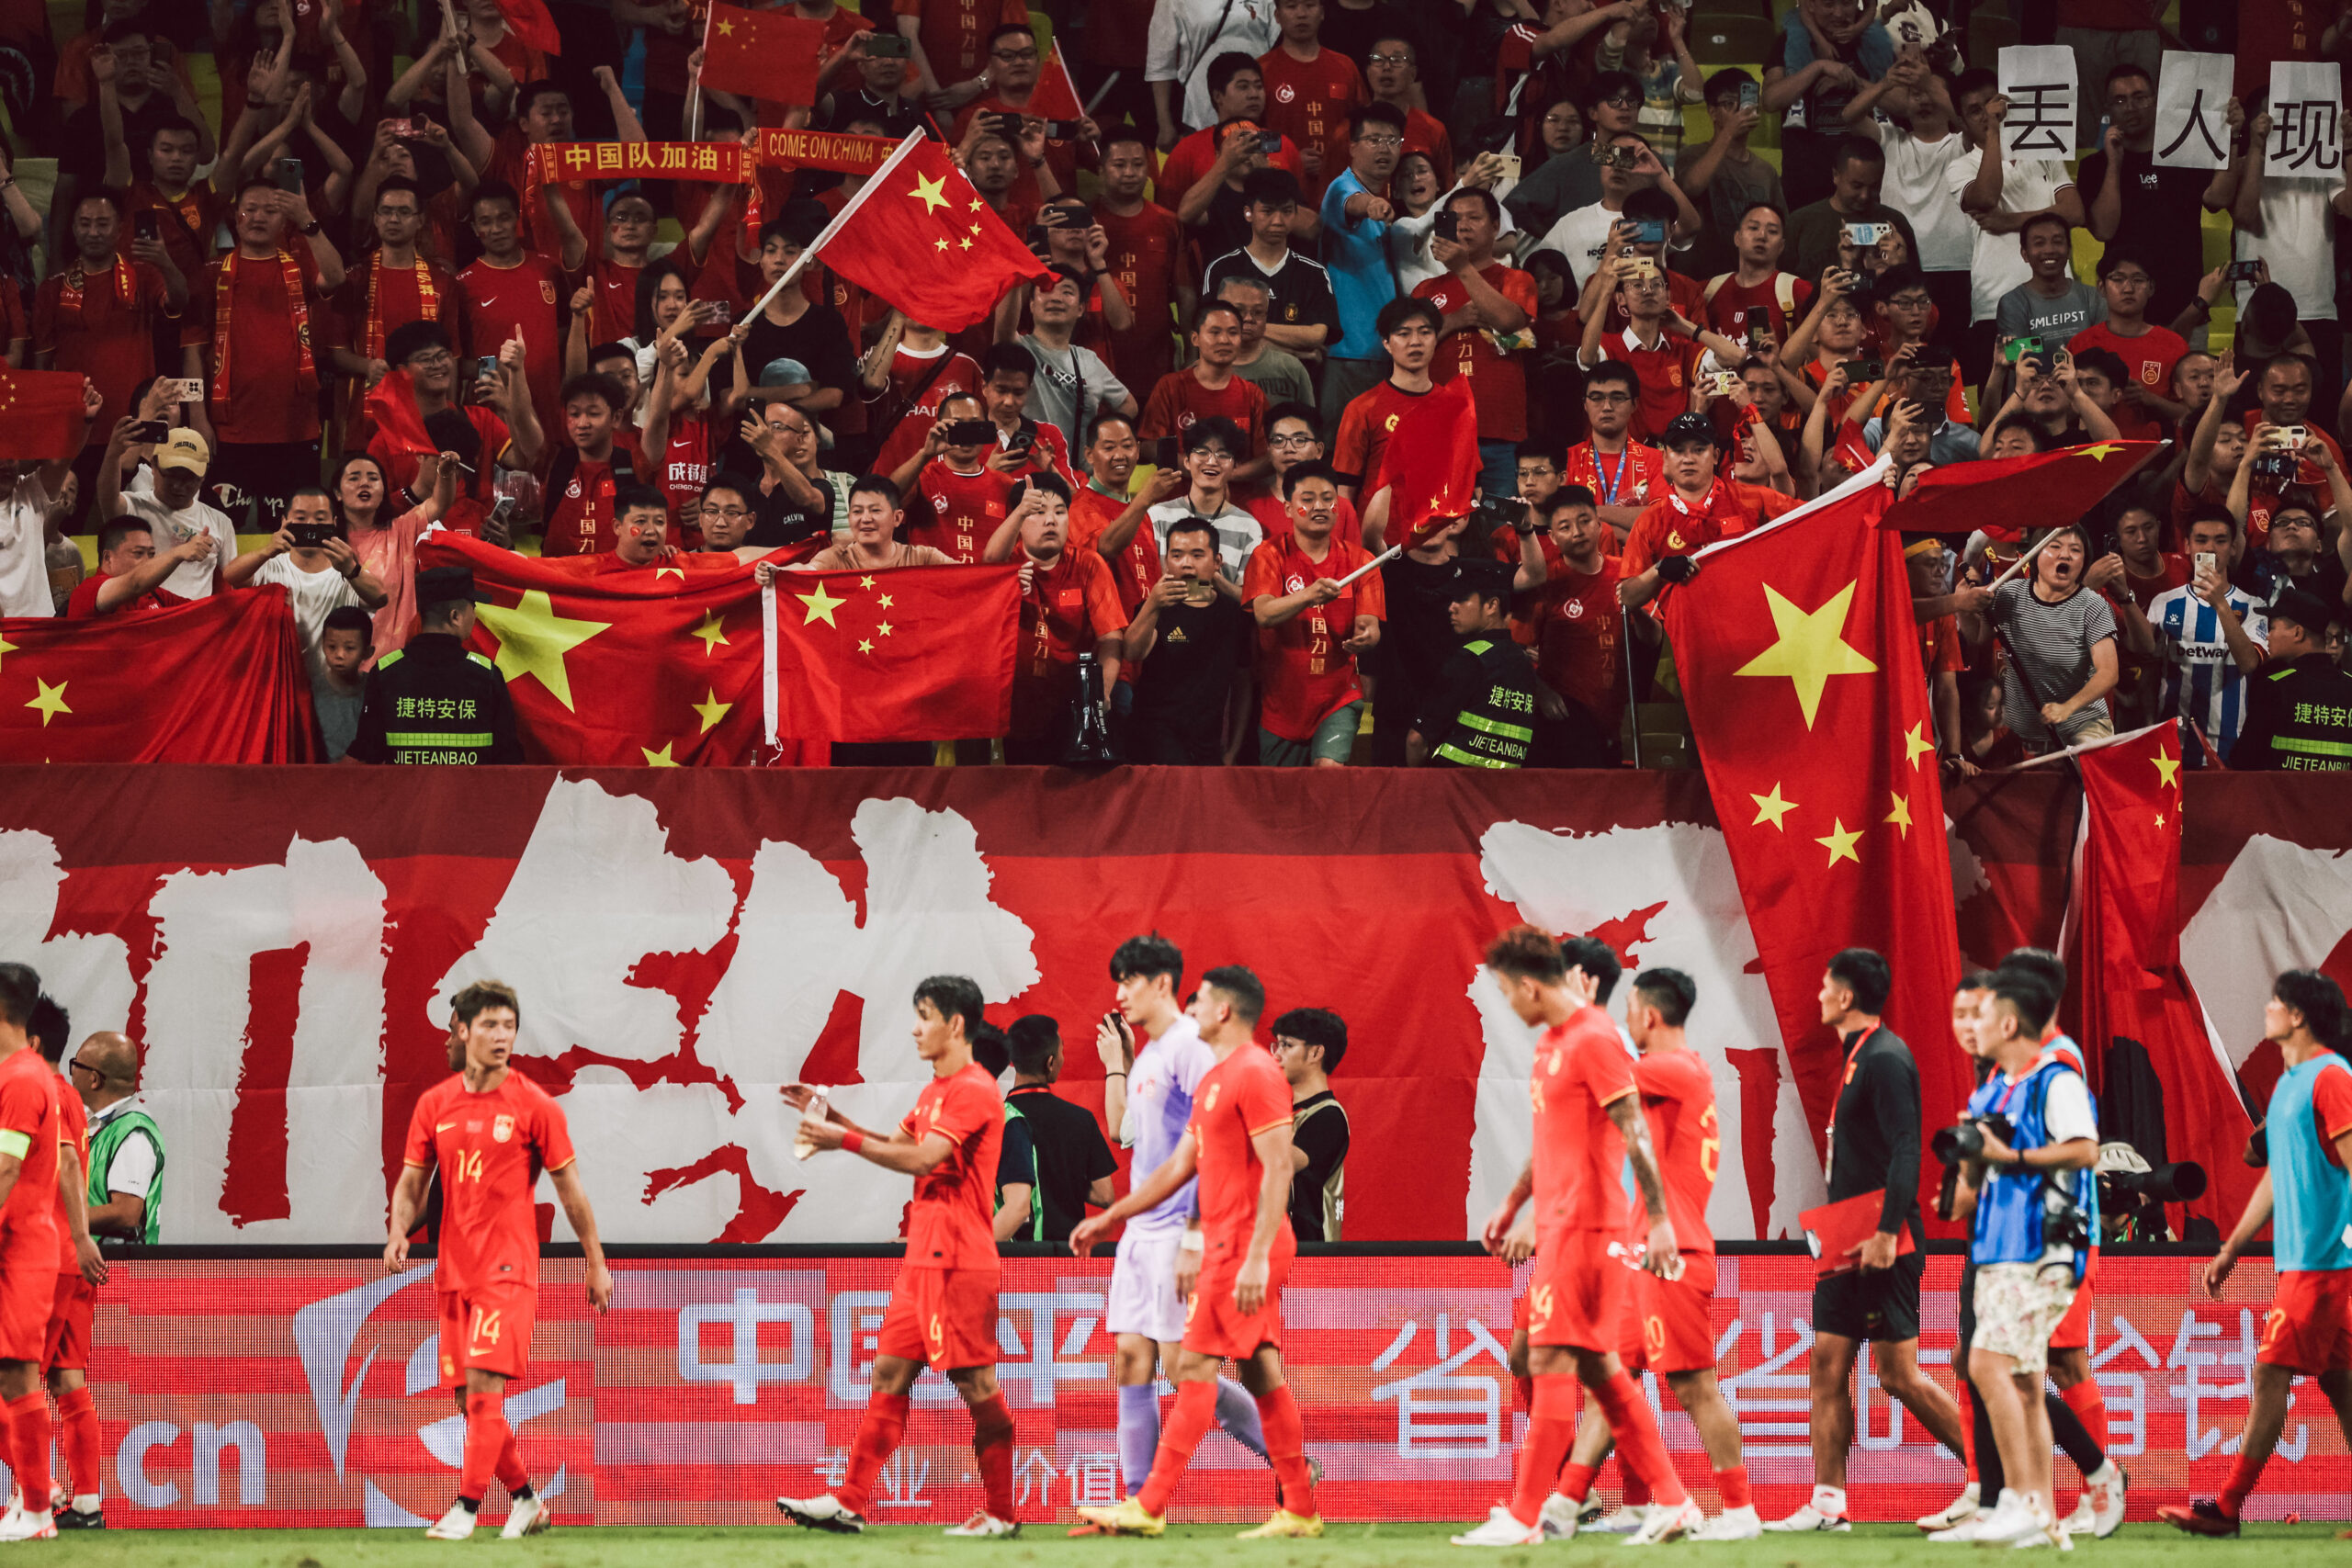 Chinese football fans reacting after their team's defeat during a friendly football match